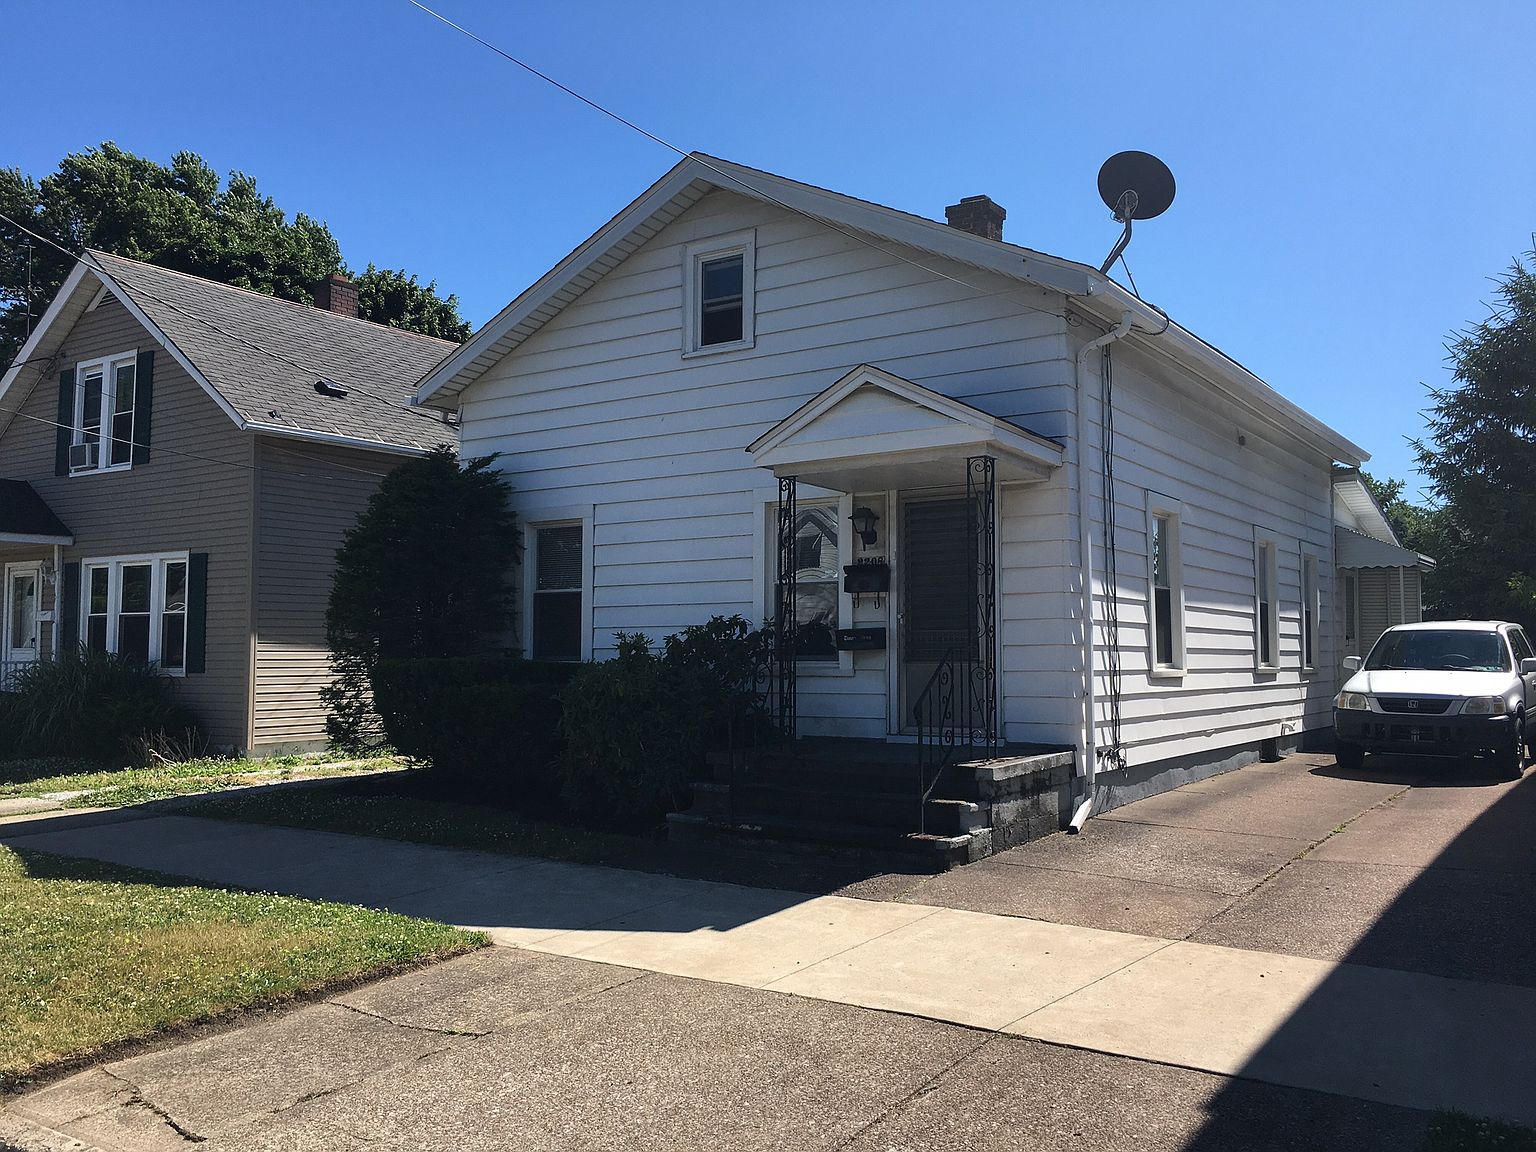 2208 Plum St Erie Pa 16502 Zillow